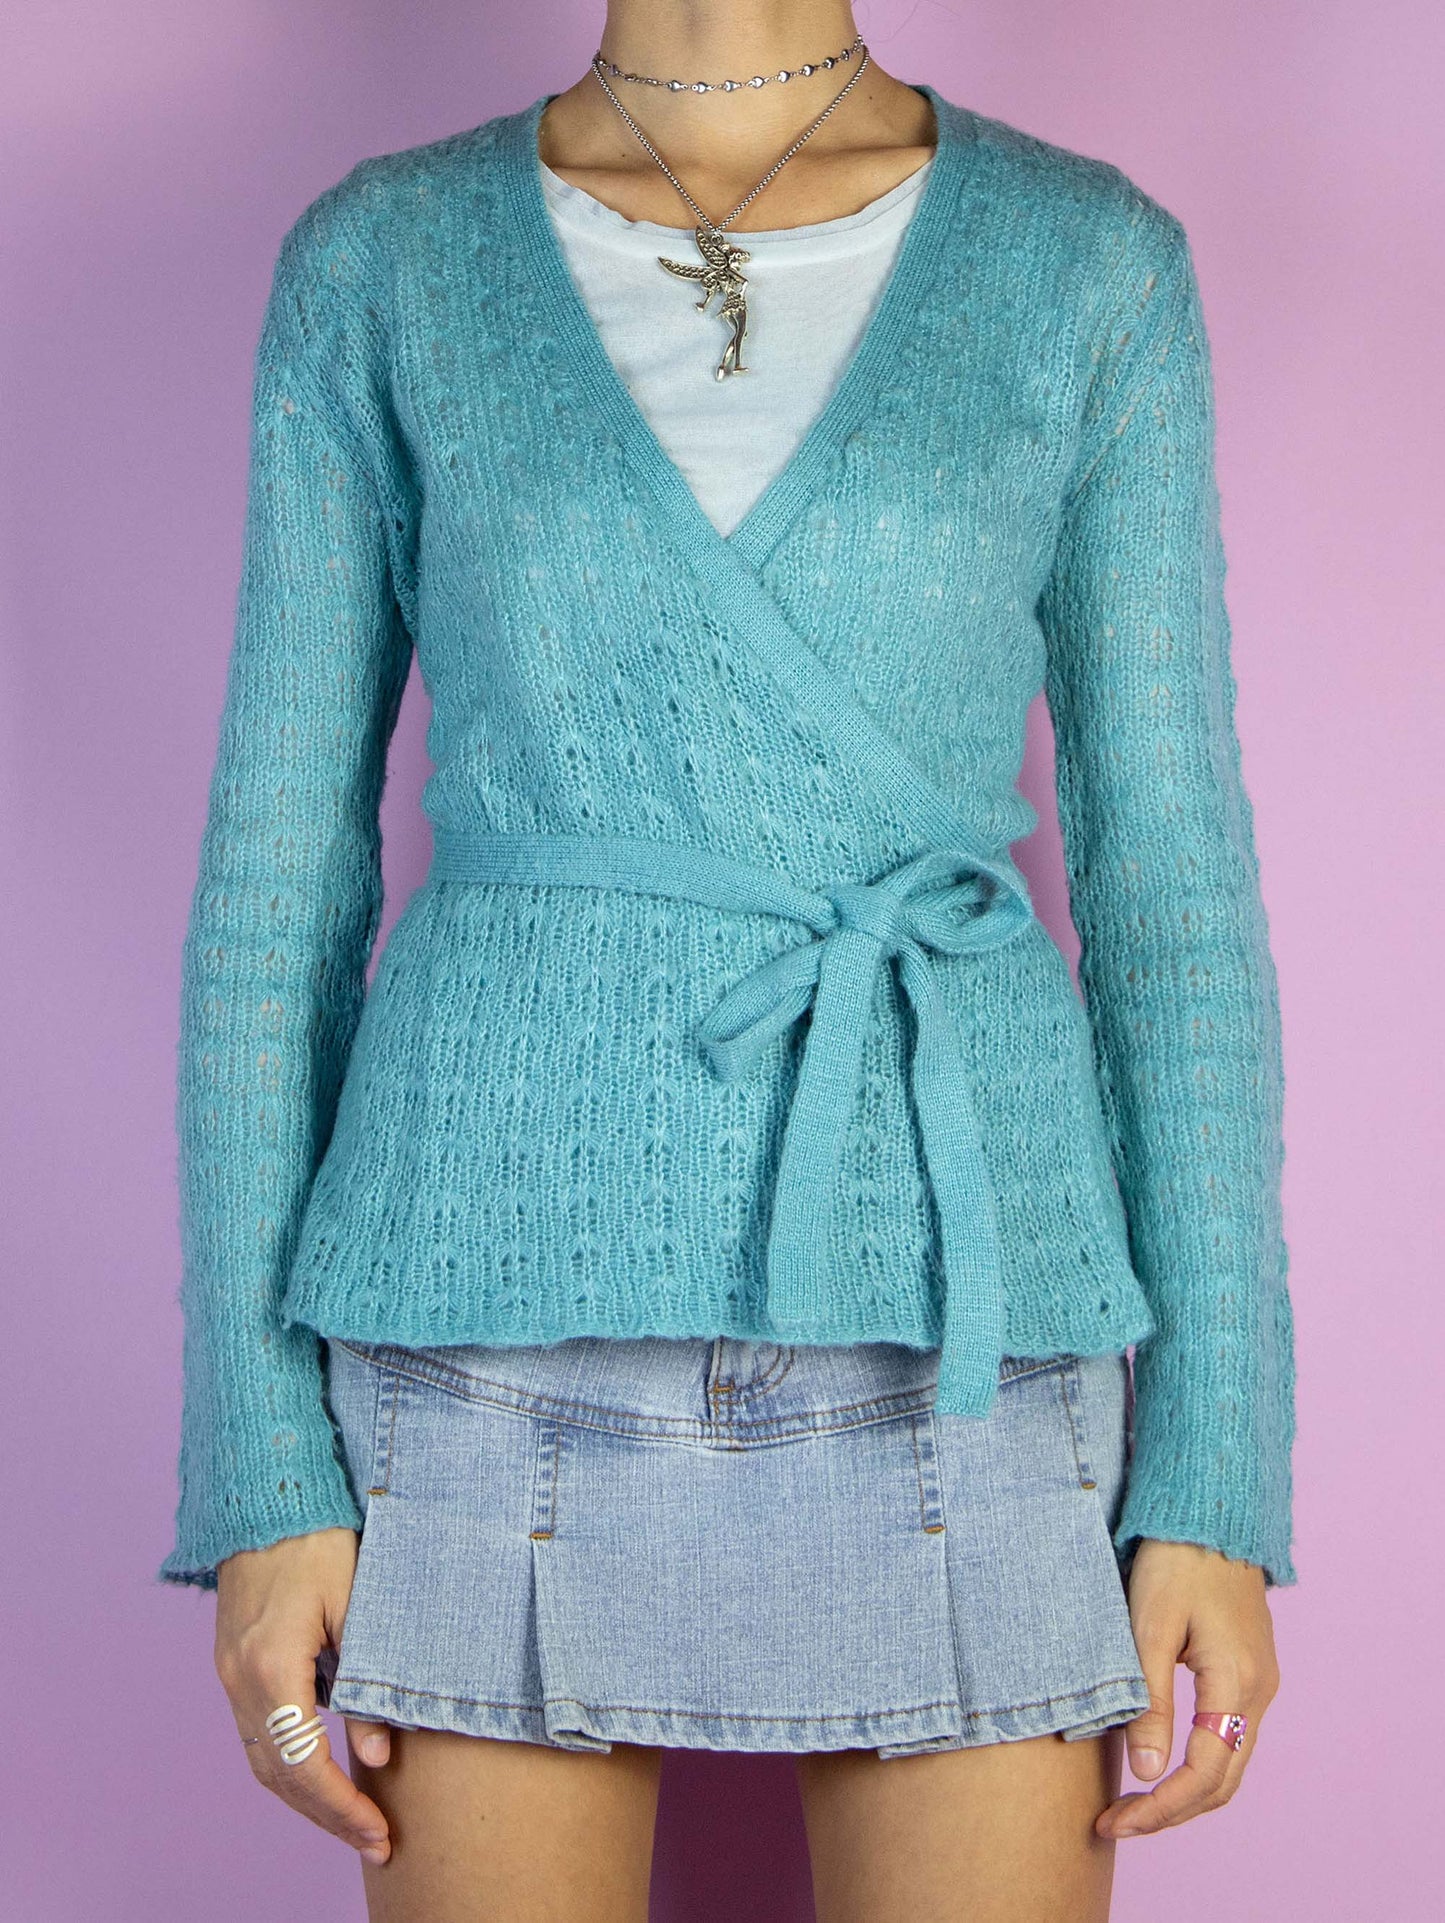 The Y2K Blue Knit Wrap Cardigan is a vintage turquoise blue cardigan with a crossed front that ties. Romantic coquette ballet 2000s crochet knit sweater.